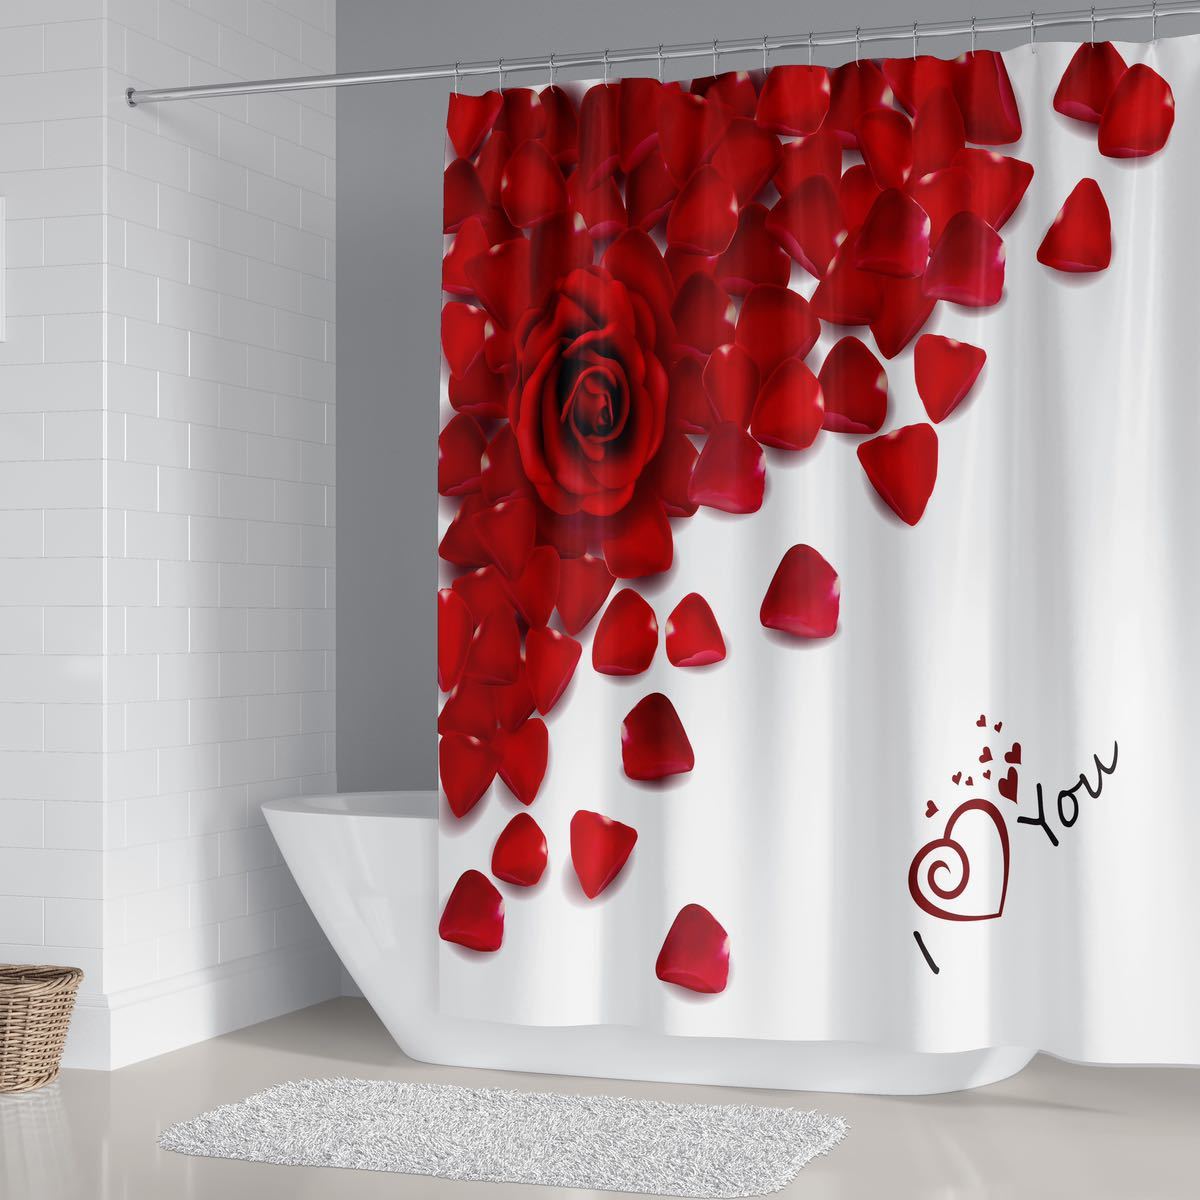 New shower curtain, mildew resistant, water repellent, rose, lightweight, quick drying, bathroom supplies #4, interior, 180*180, atmosphere, Handmade items, curtain, fabric, curtain, Cafe Curtains